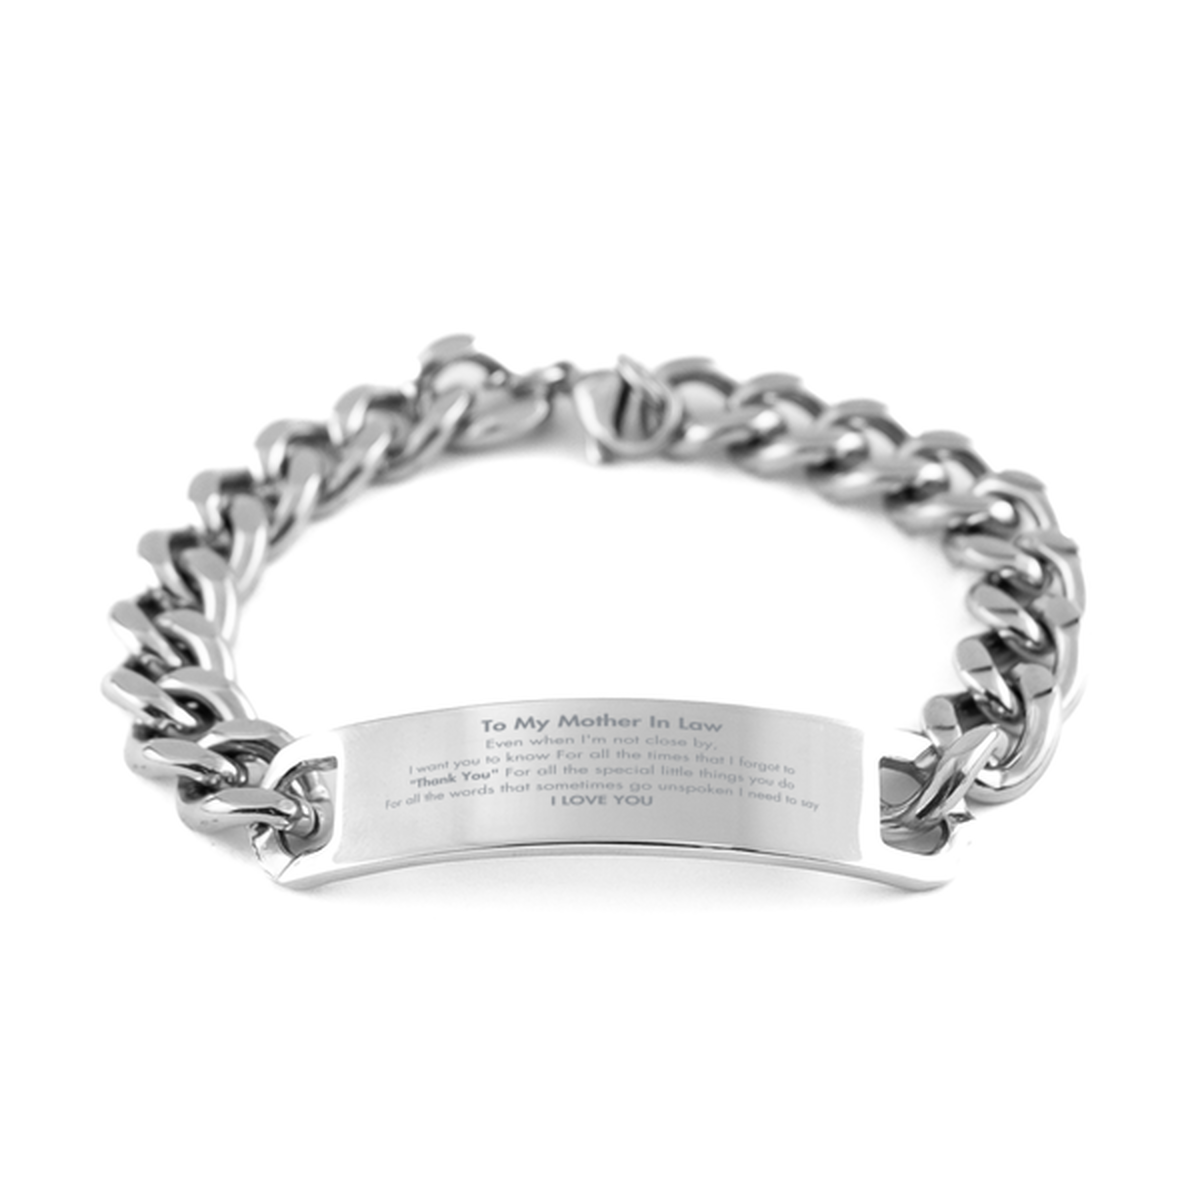 Thank You Gifts for Mother In Law, Keepsake Cuban Chain Stainless Steel Bracelet Gifts for Mother In Law Birthday Mother's day Father's Day Mother In Law For all the words That sometimes go unspoken I need to say I LOVE YOU